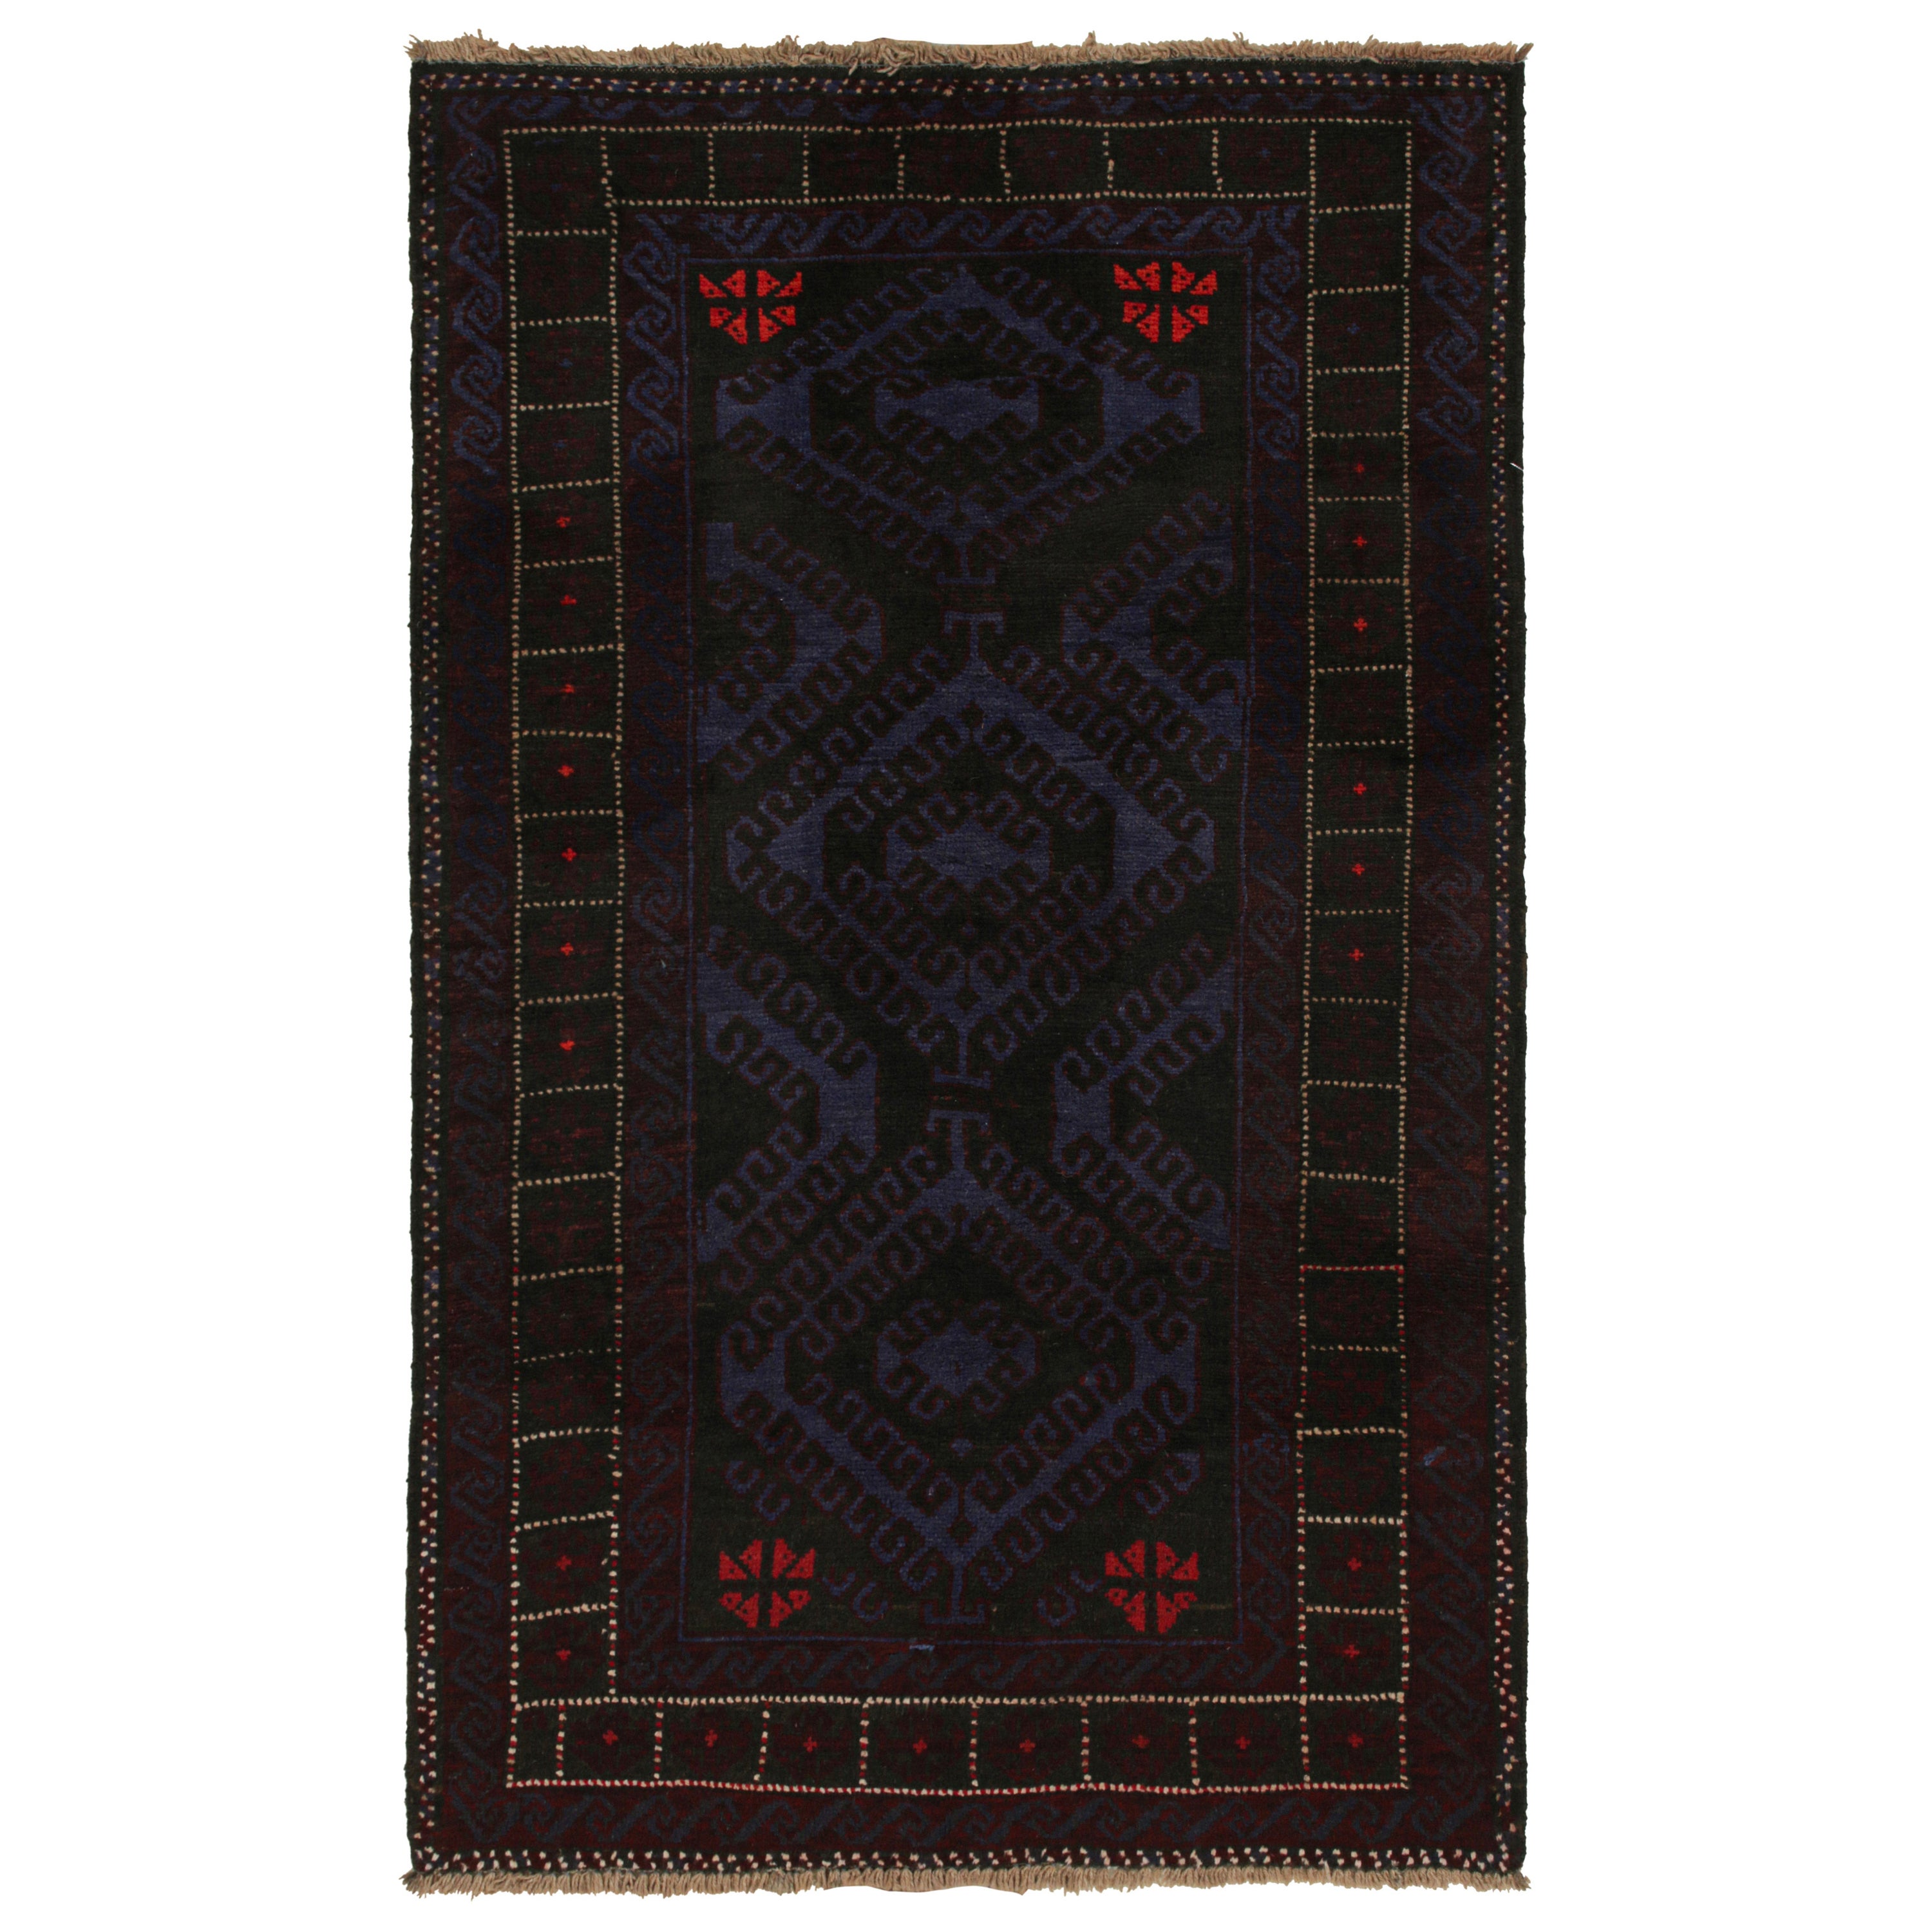 Vintage Baluch Tribal Rug with Blue & Black Geometric Patterns, from Rug & Kilim For Sale